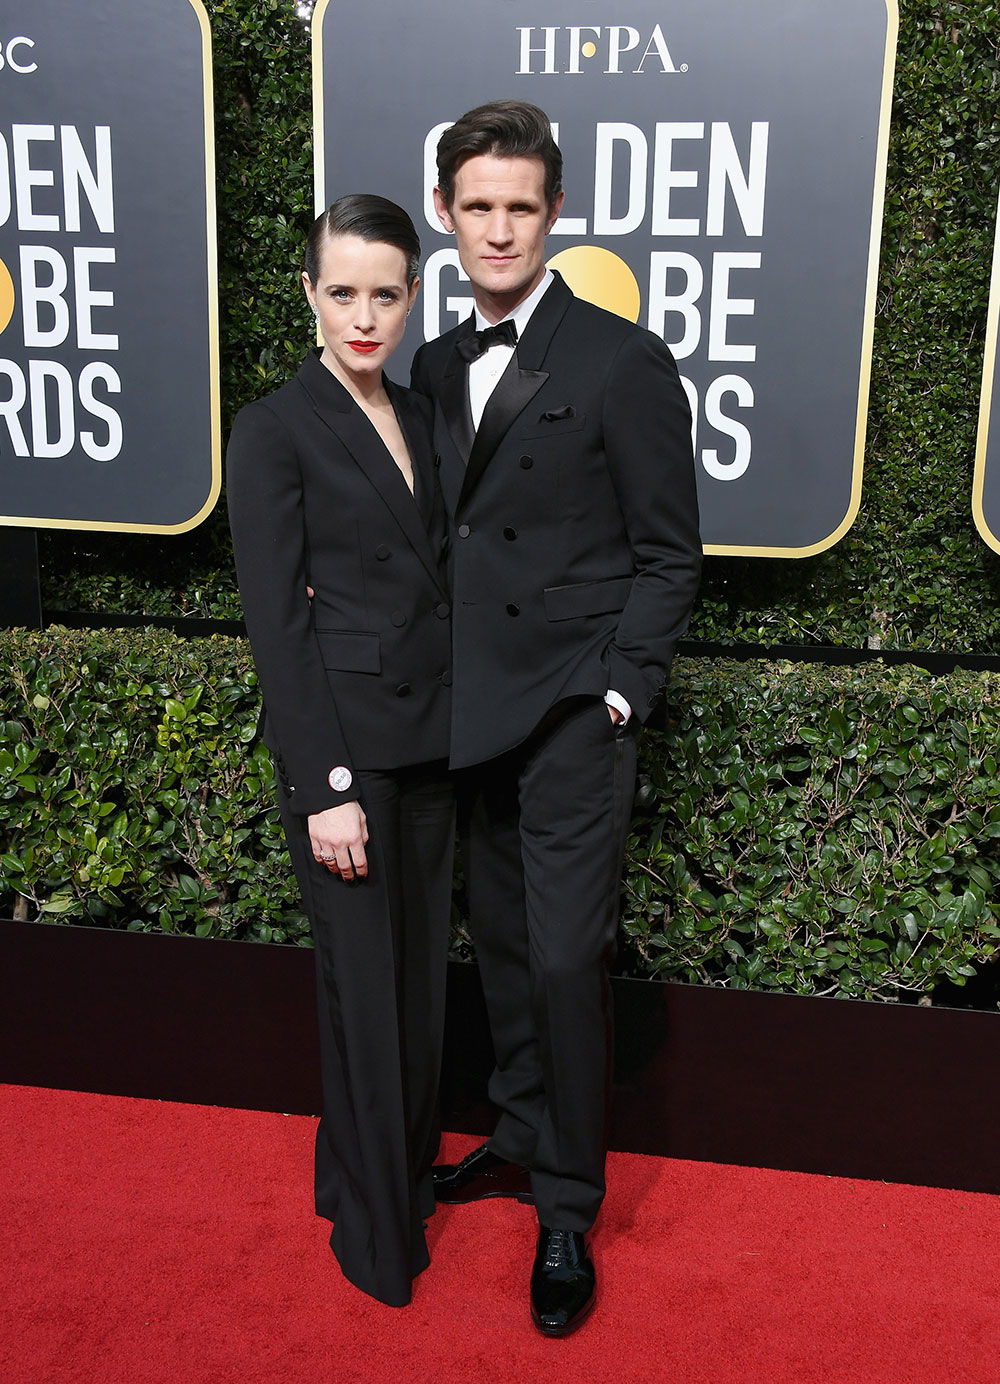 The Crown co-stars Claire Foy and Matt Smith.